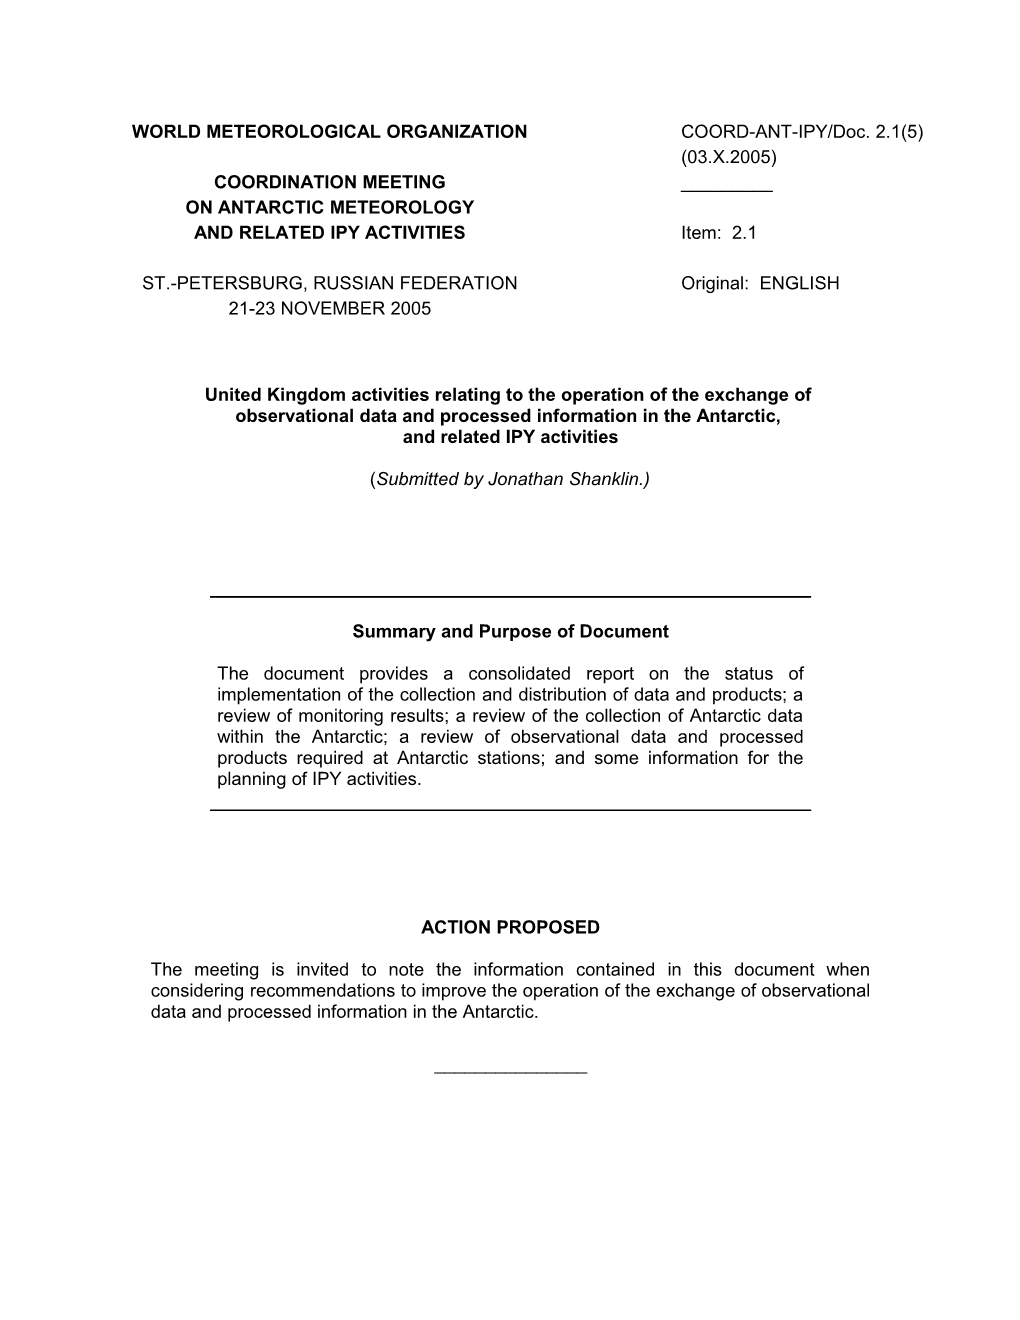 United Kingdom Activities Relating to the Operation of the Exchange Of